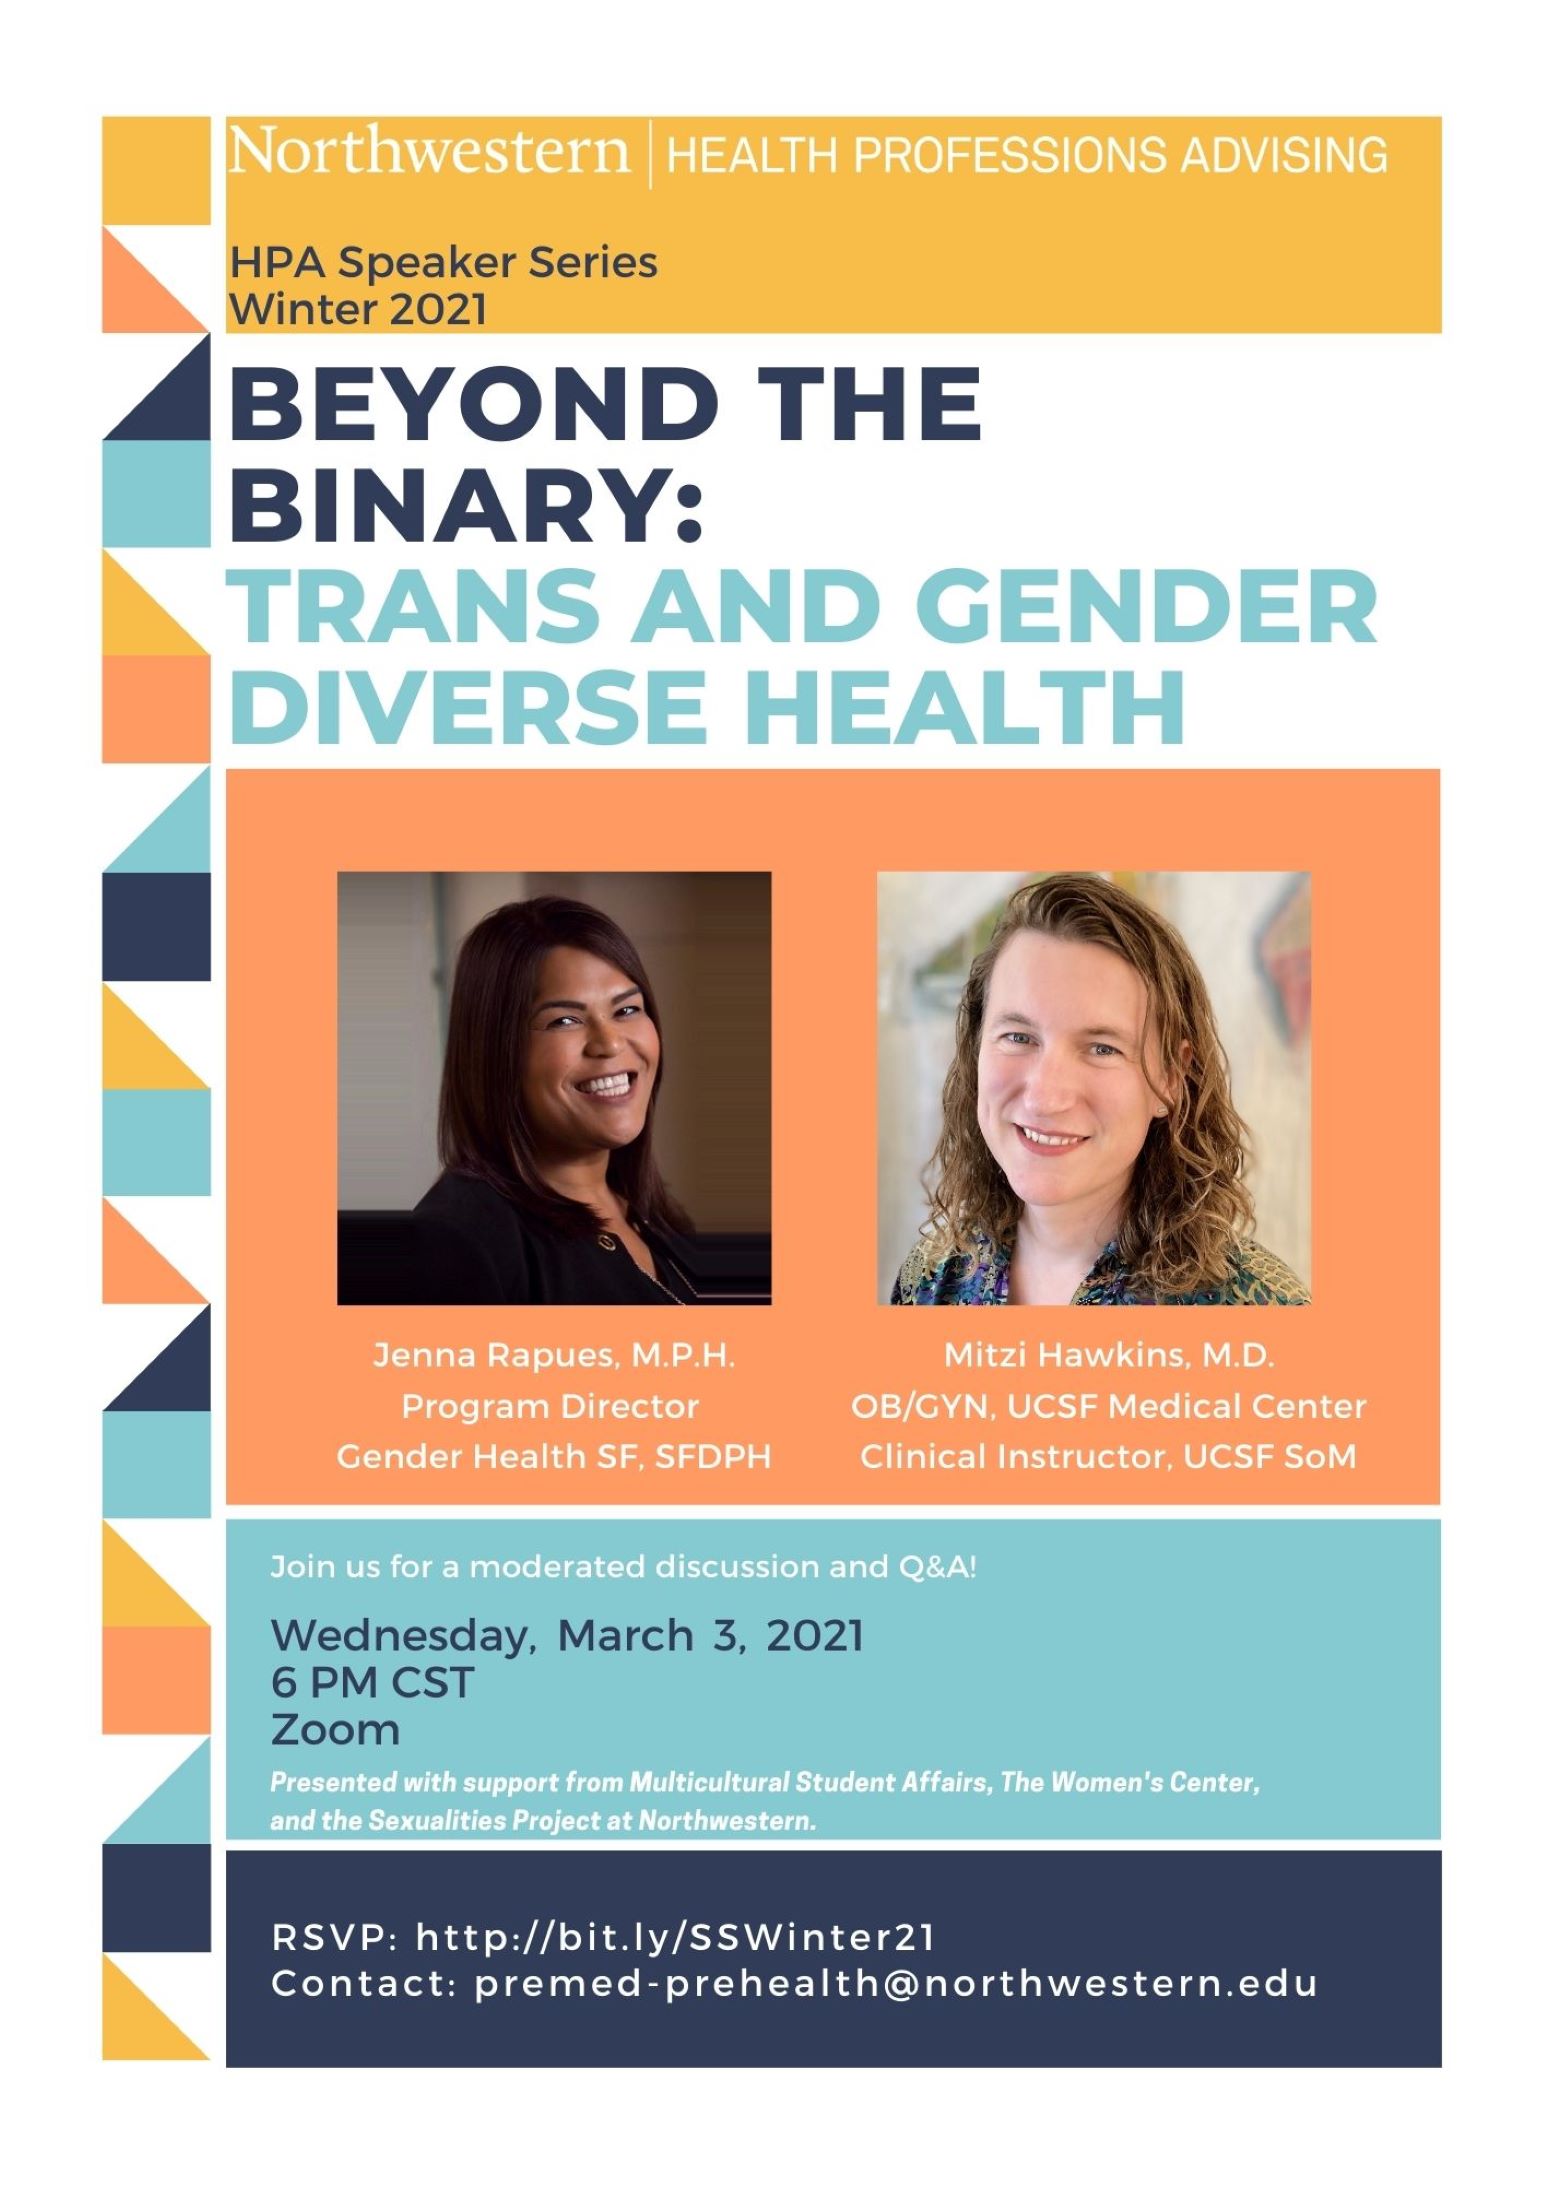 Beyond the Binary: Trans and Gender Diverse Health